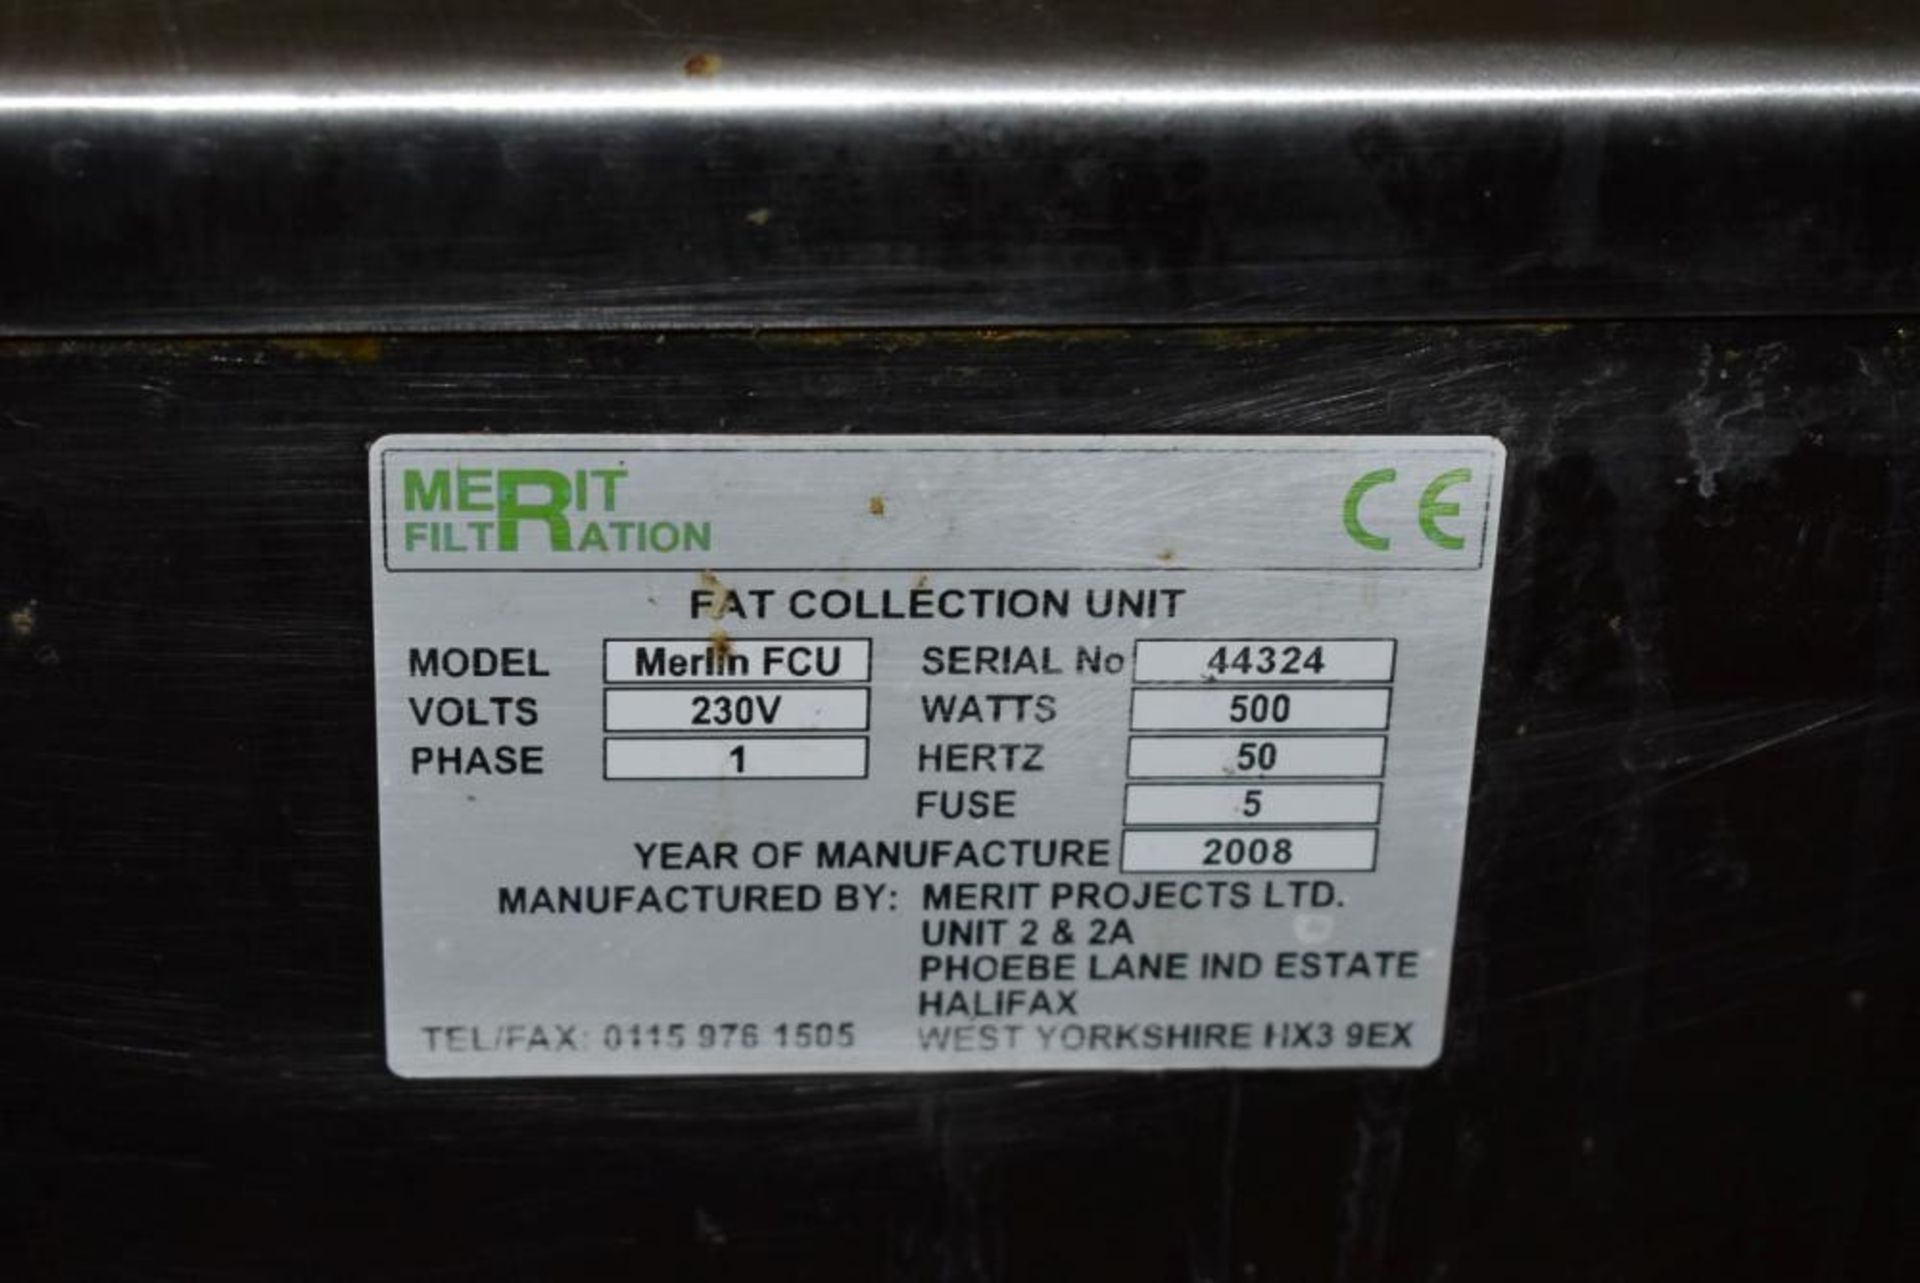 1 x Merlin FCU Fat Collection Unit For Commercial Kitchens - CL232 - Ref LF294 E2A - Location: Altin - Image 3 of 7